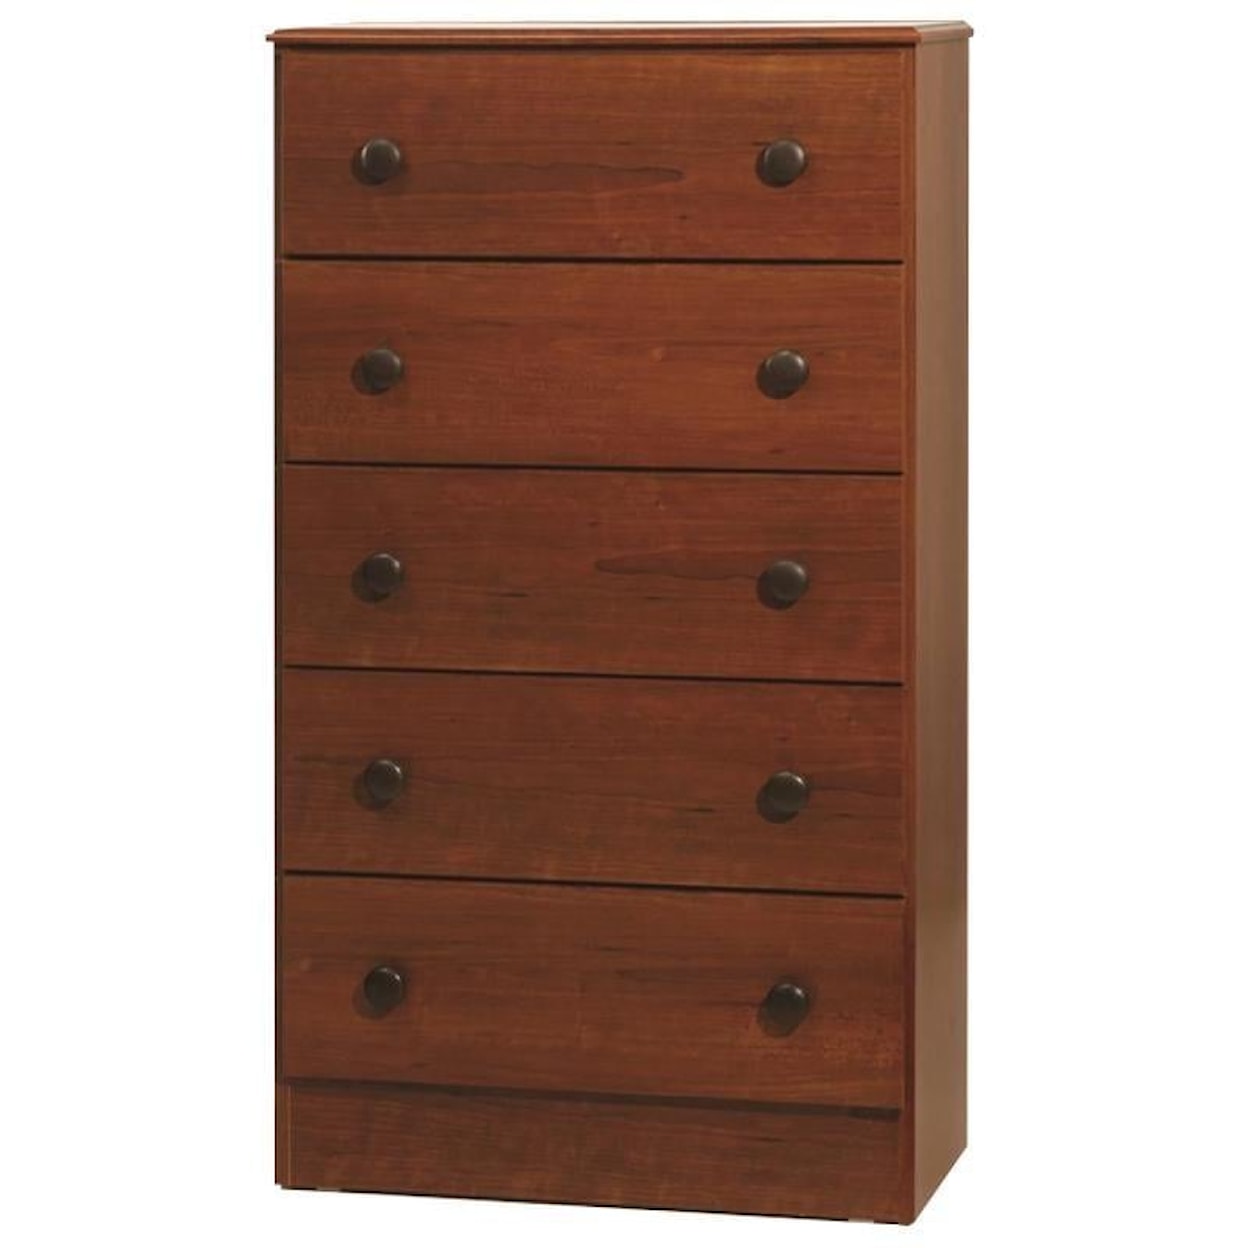 Kith Furniture Promotional Chests 5 Drawer Chest